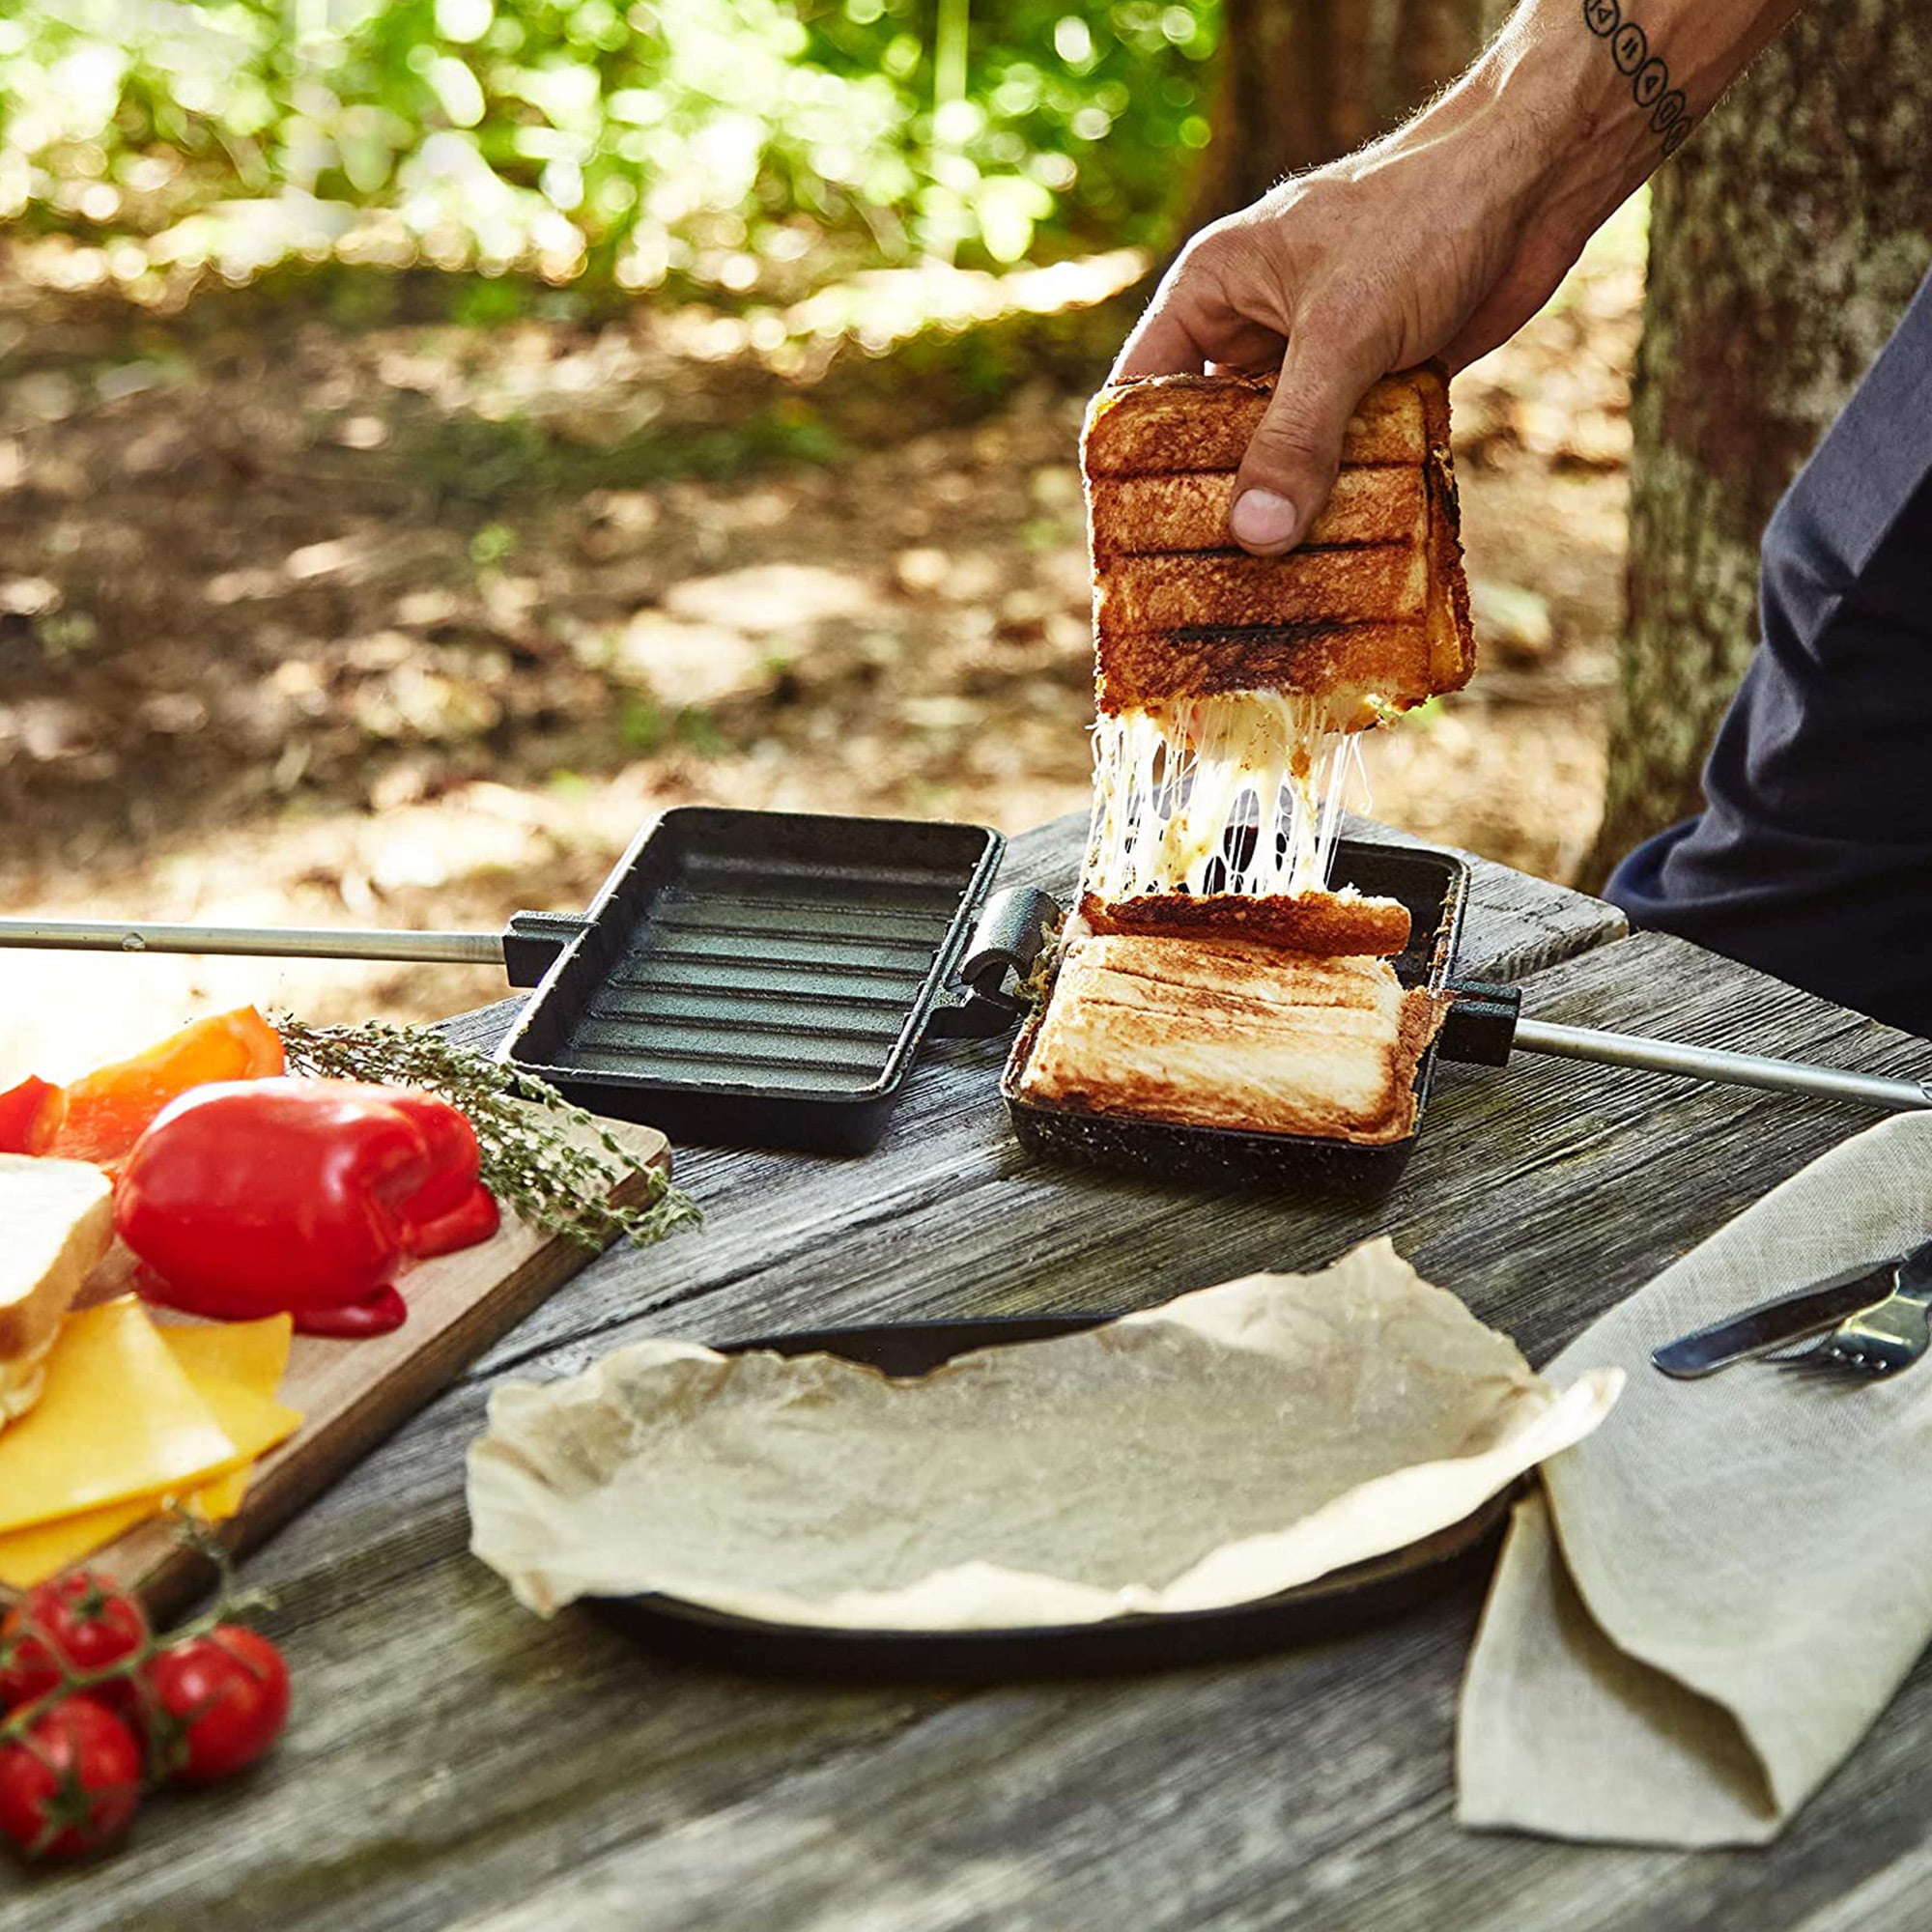 Pie Irons: Easy Campfire Cooking 101 - Outside Online